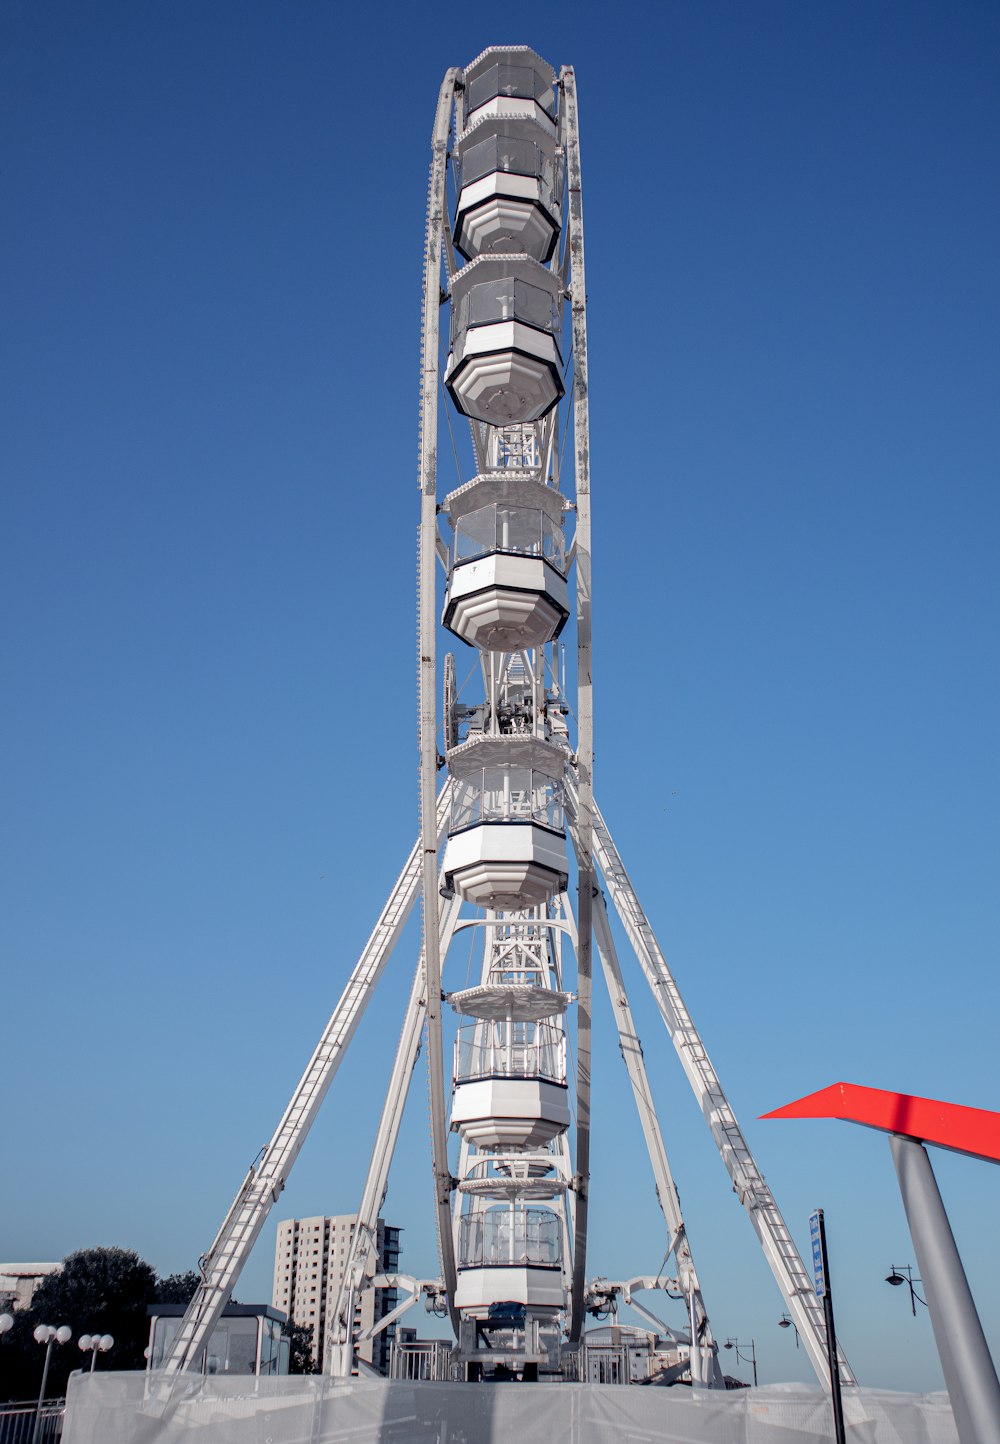 white and red tower under blue sky during daytime